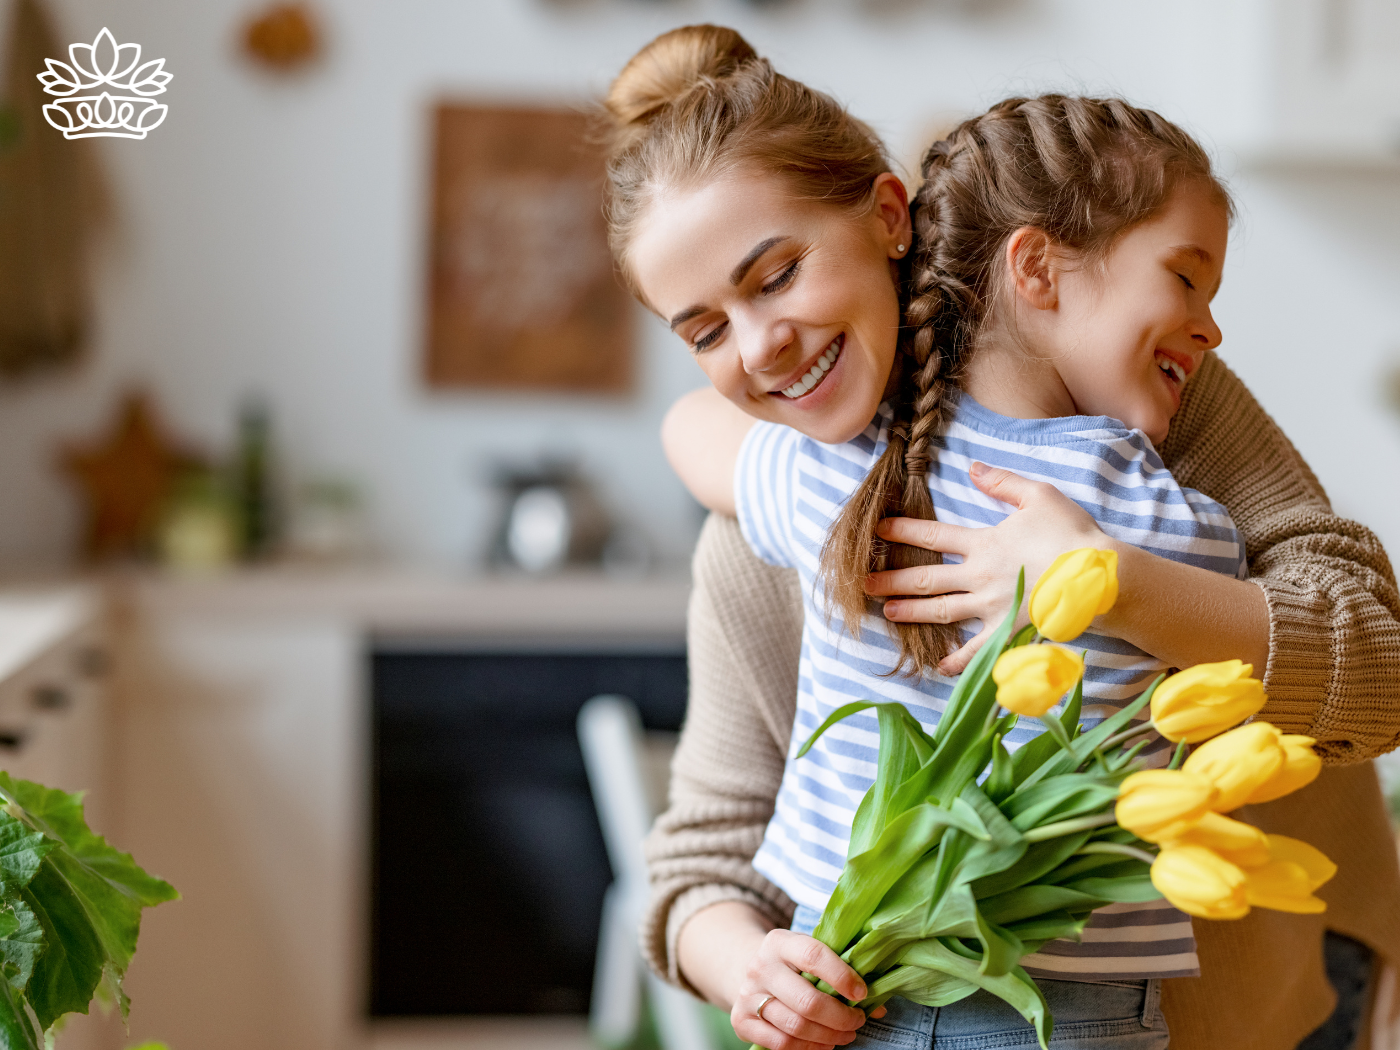 A mother and daughter hugging with a bouquet of yellow tulips - Fabulous Flowers and Gifts, All Fabulous Flowers and Gift Boxes.